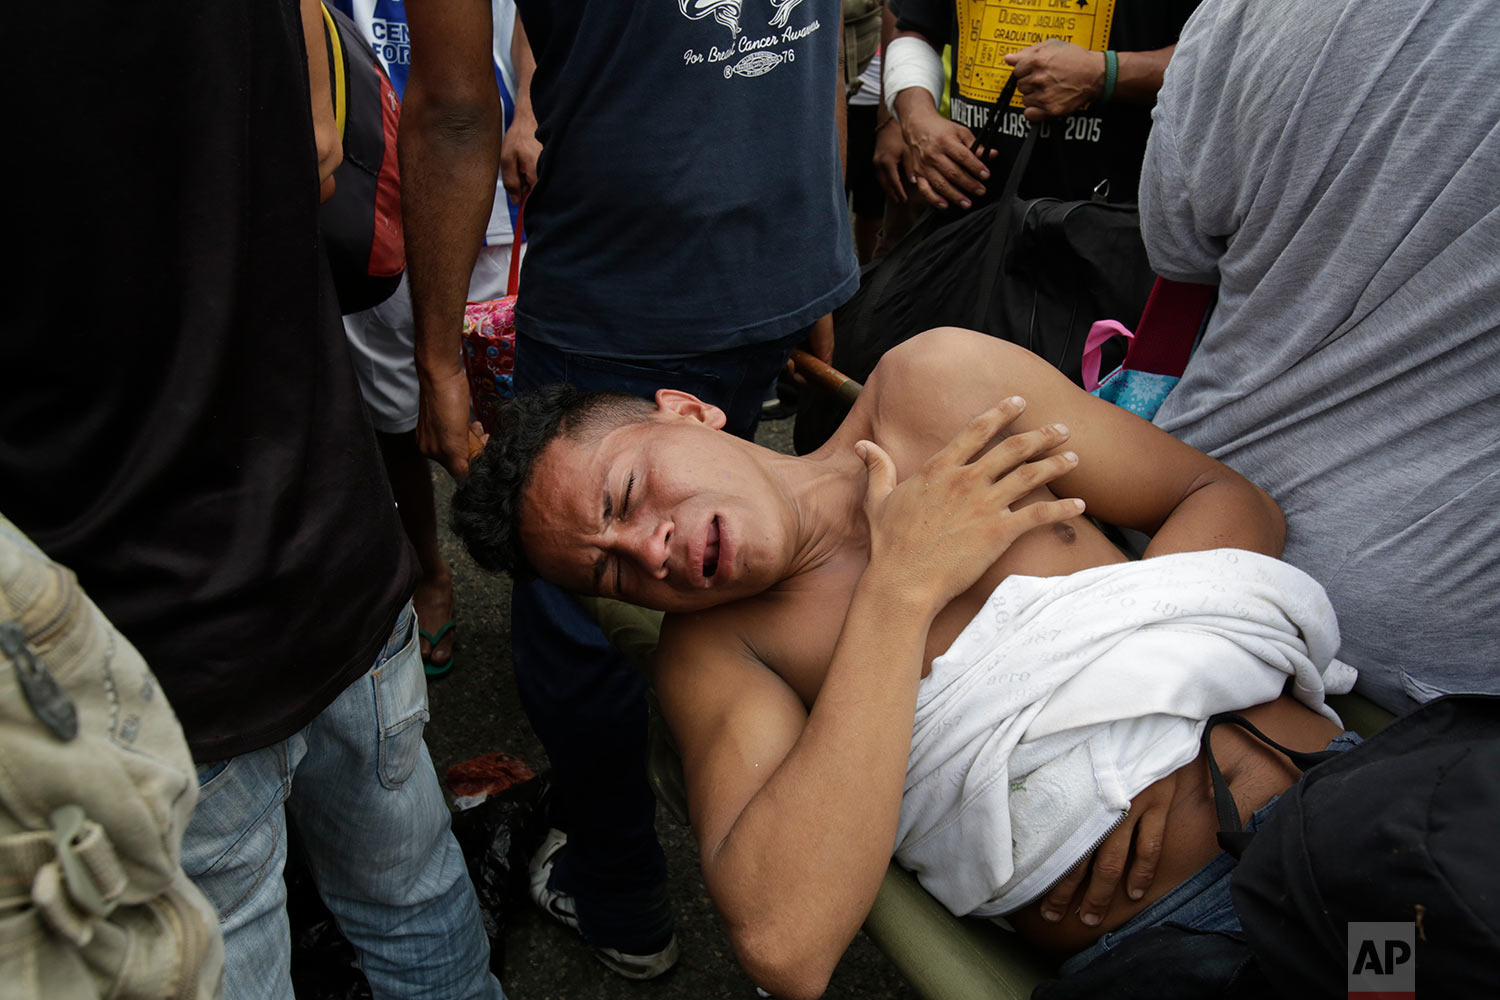  A wounded man grimaces in pain after clashes with the Mexican Federal Police at the border crossing in Ciudad Hidalgo, Mexico, Friday, Oct. 19, 2018. (AP Photo/Moises Castillo) 